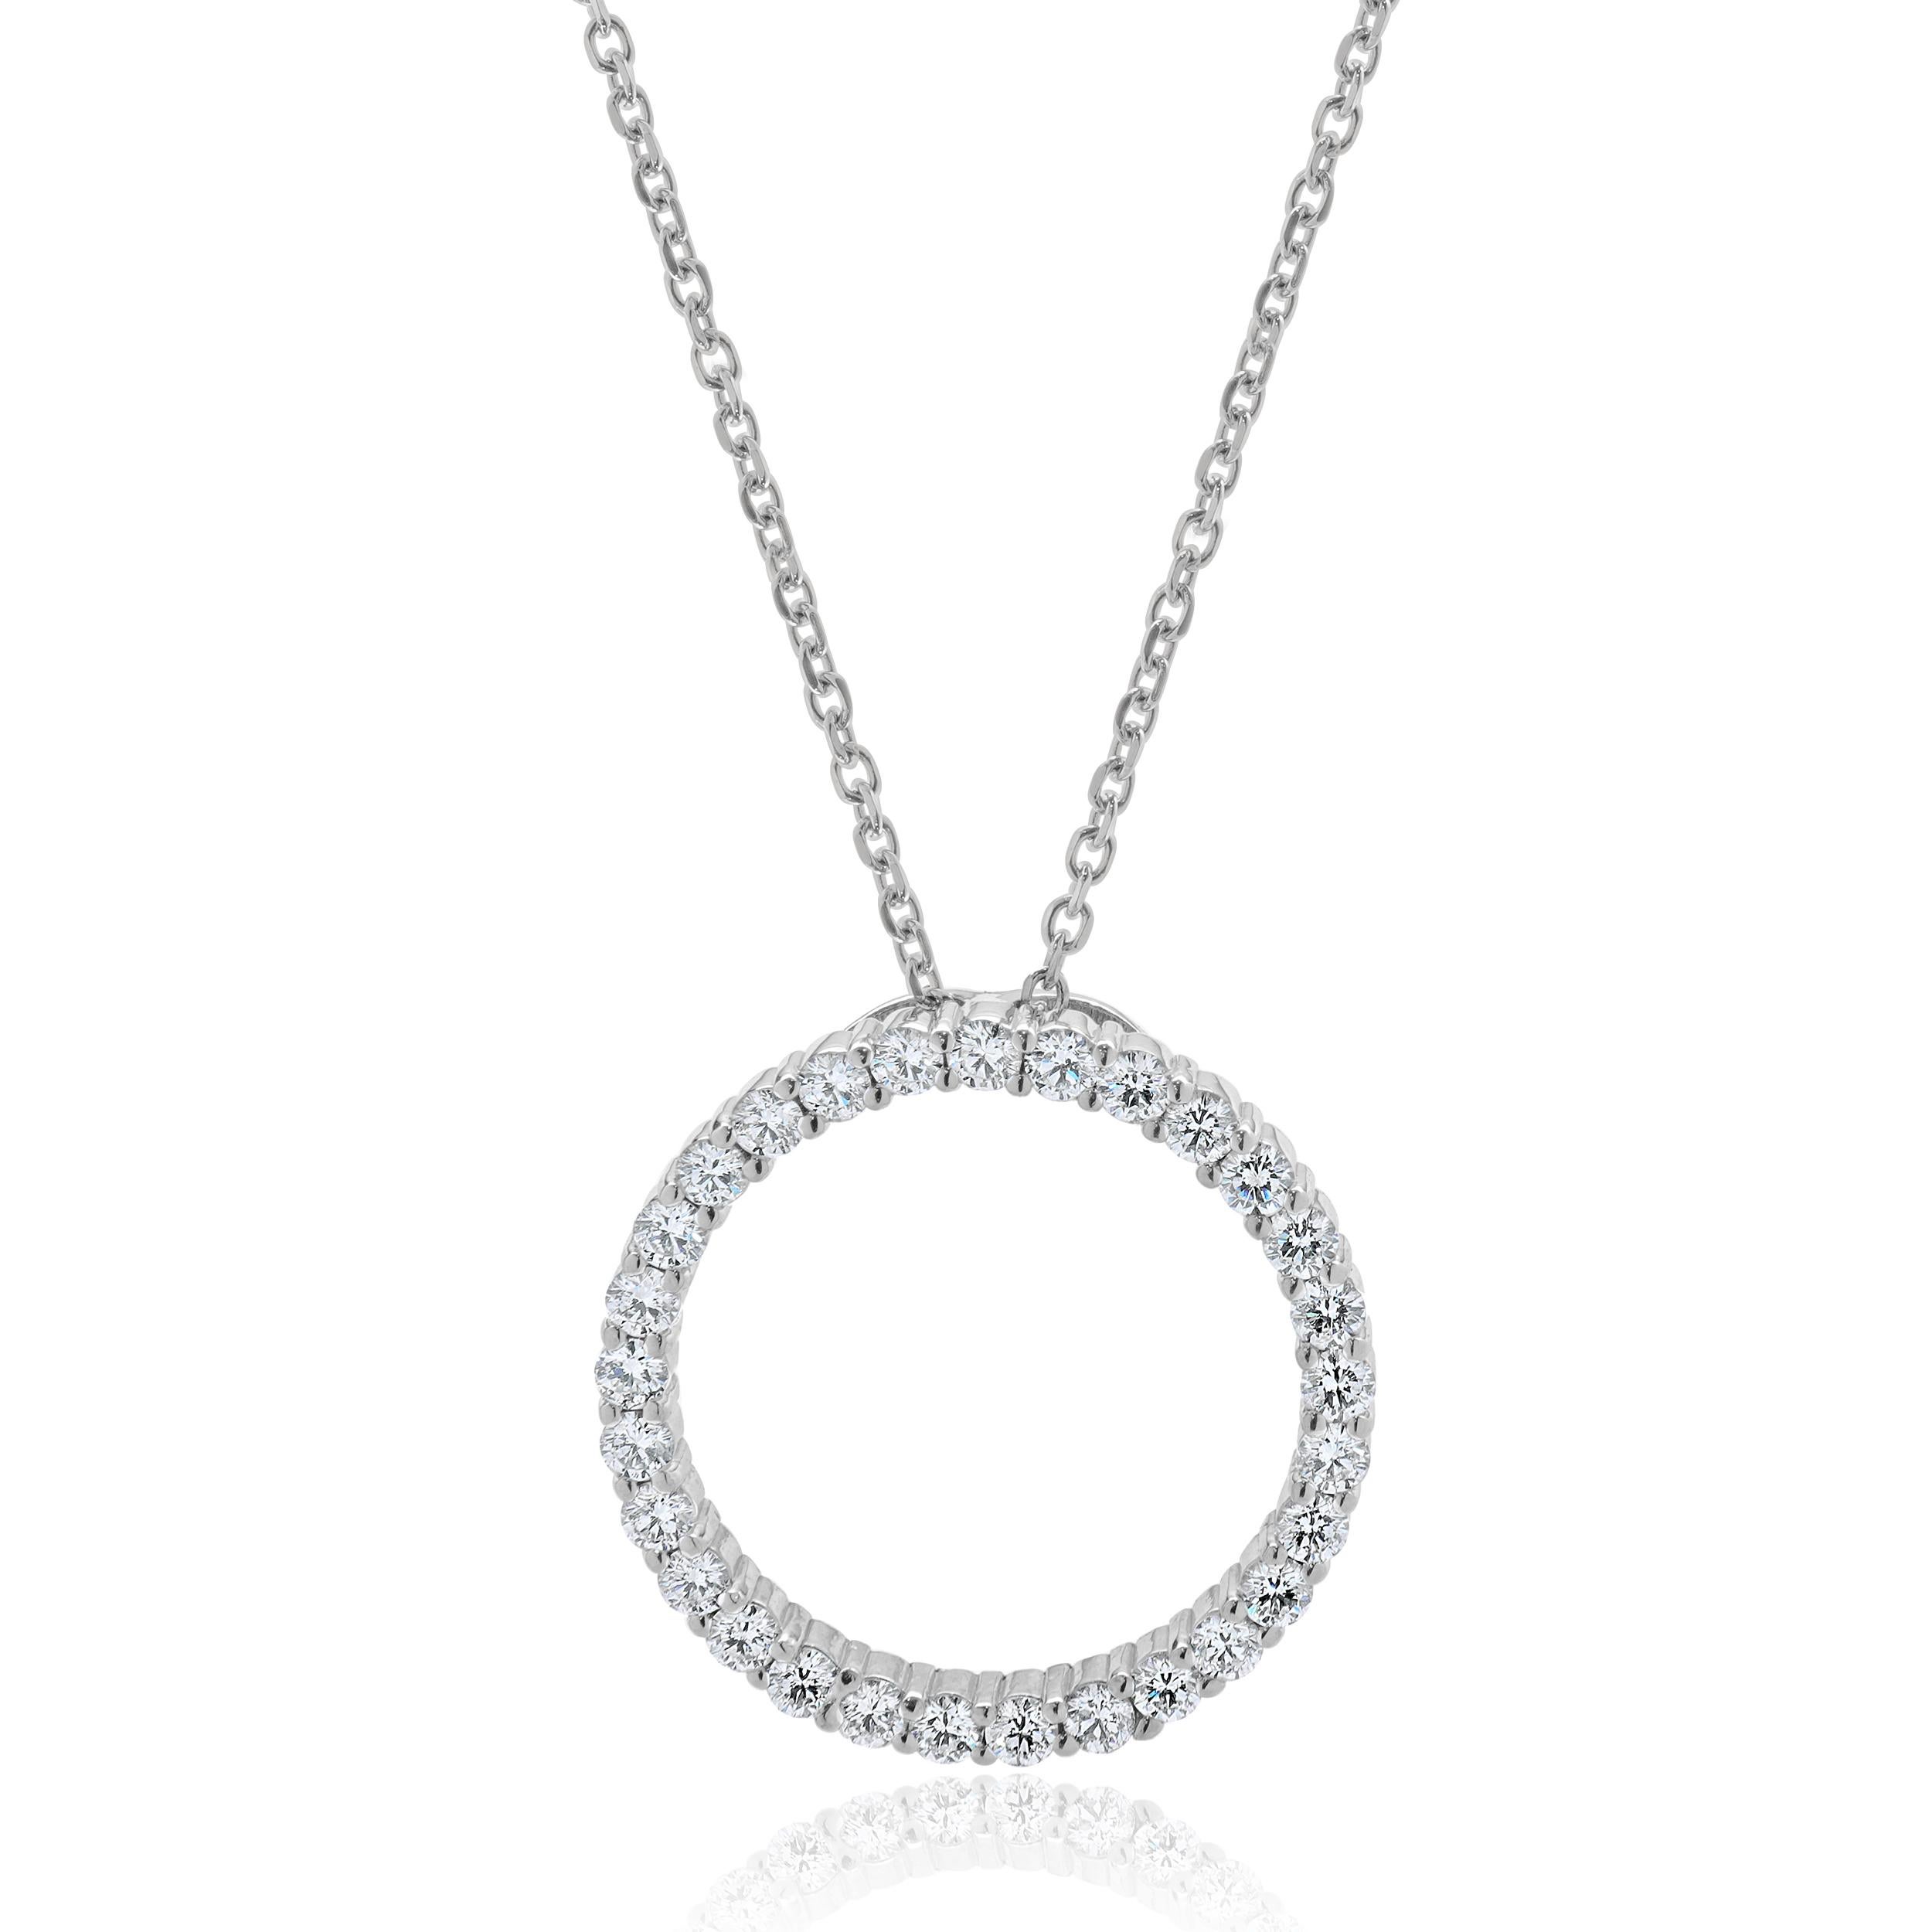 Designer: custom
Material: 14K white gold
Diamonds: 29 round brilliant cut = 1.16cttw
Color: H
Clarity: SI1
Dimensions: necklace measures 18-inches in length
Weight: 7.28 grams
